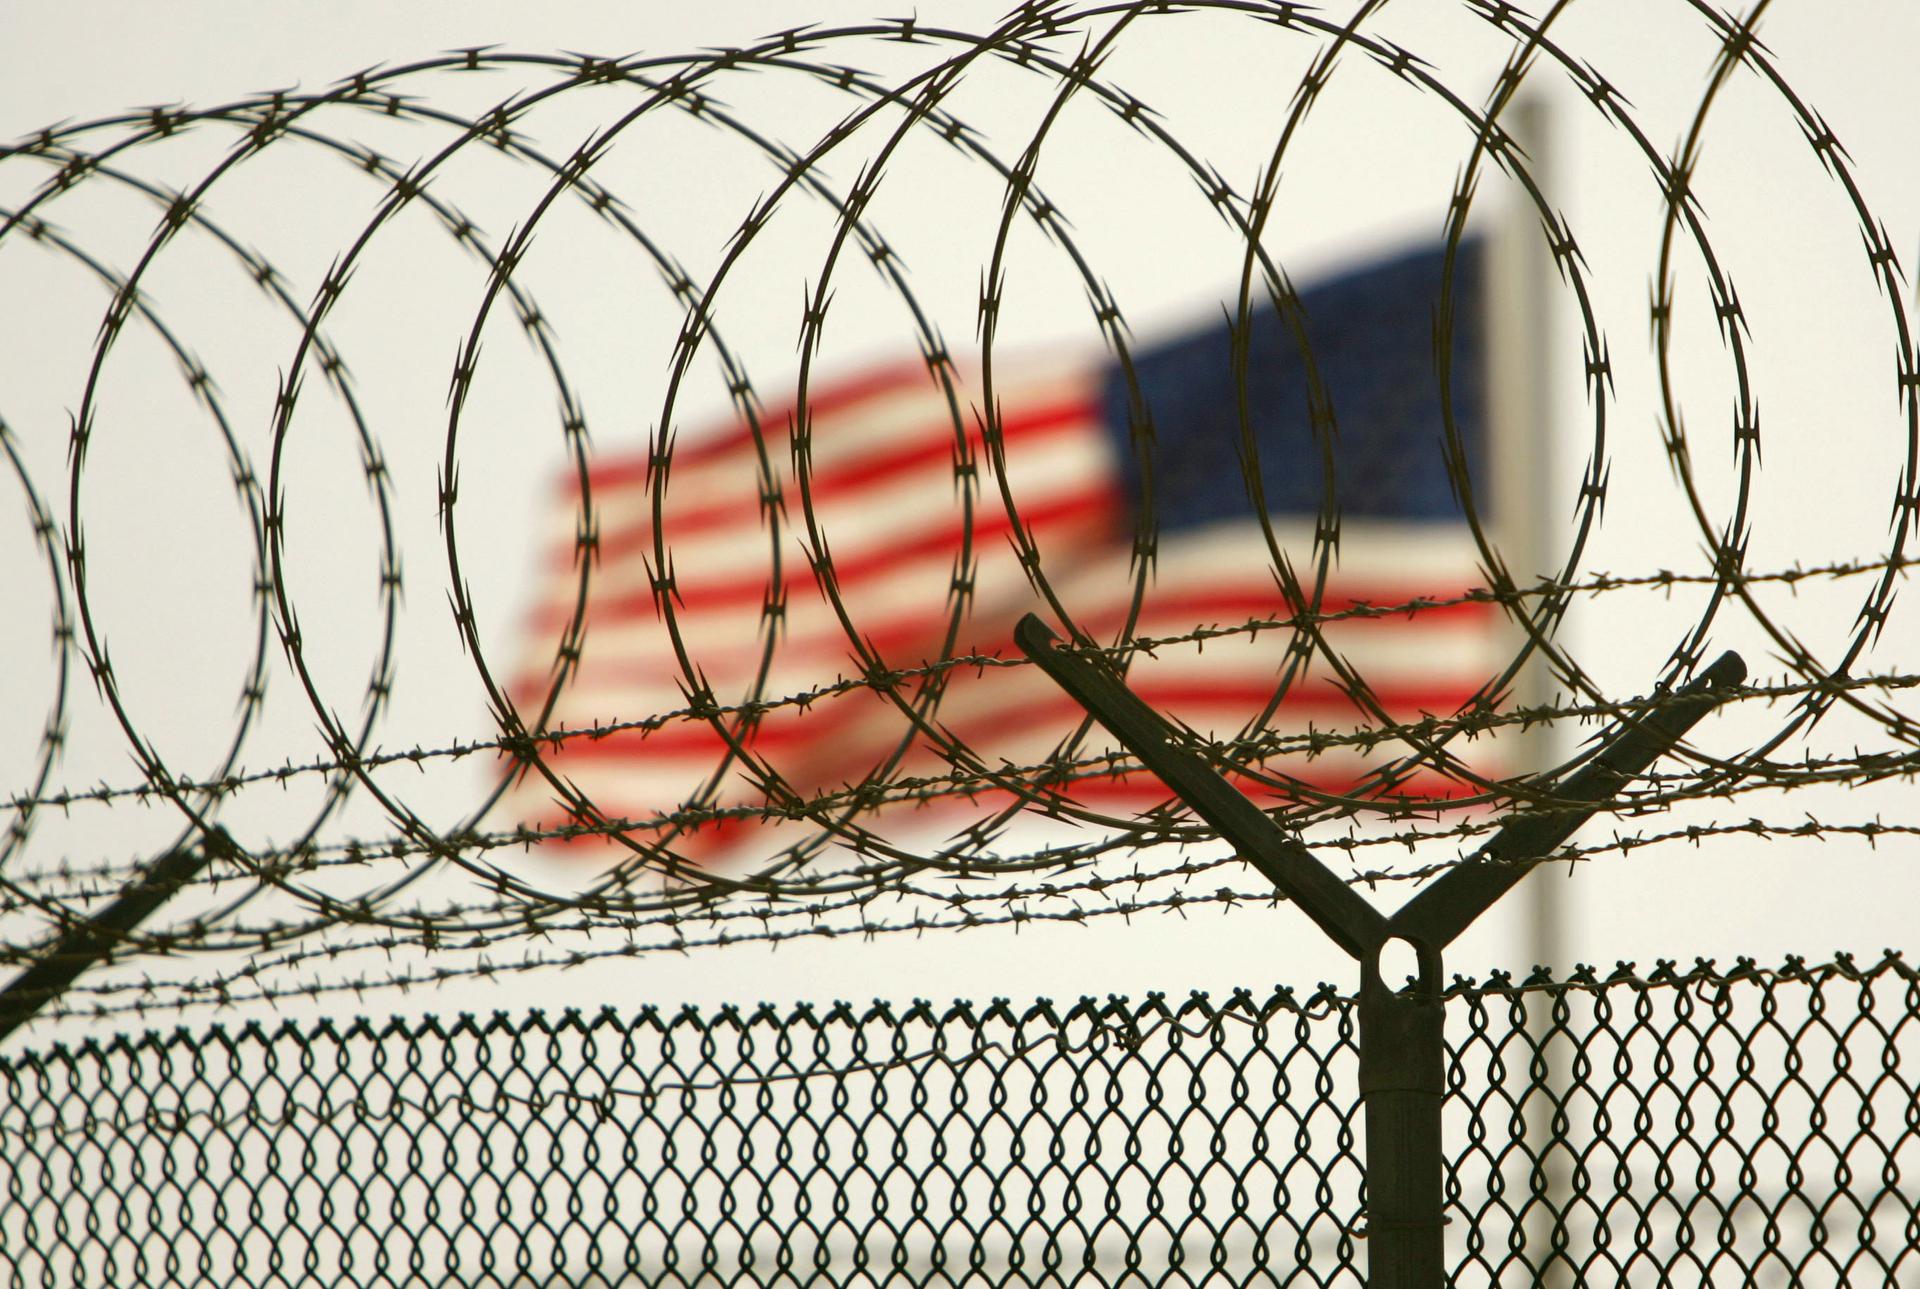 Cancer cluster investigations are notoriously difficult, but civilian and military personnel who've worked at Gitmo are increasingly alarmed.  